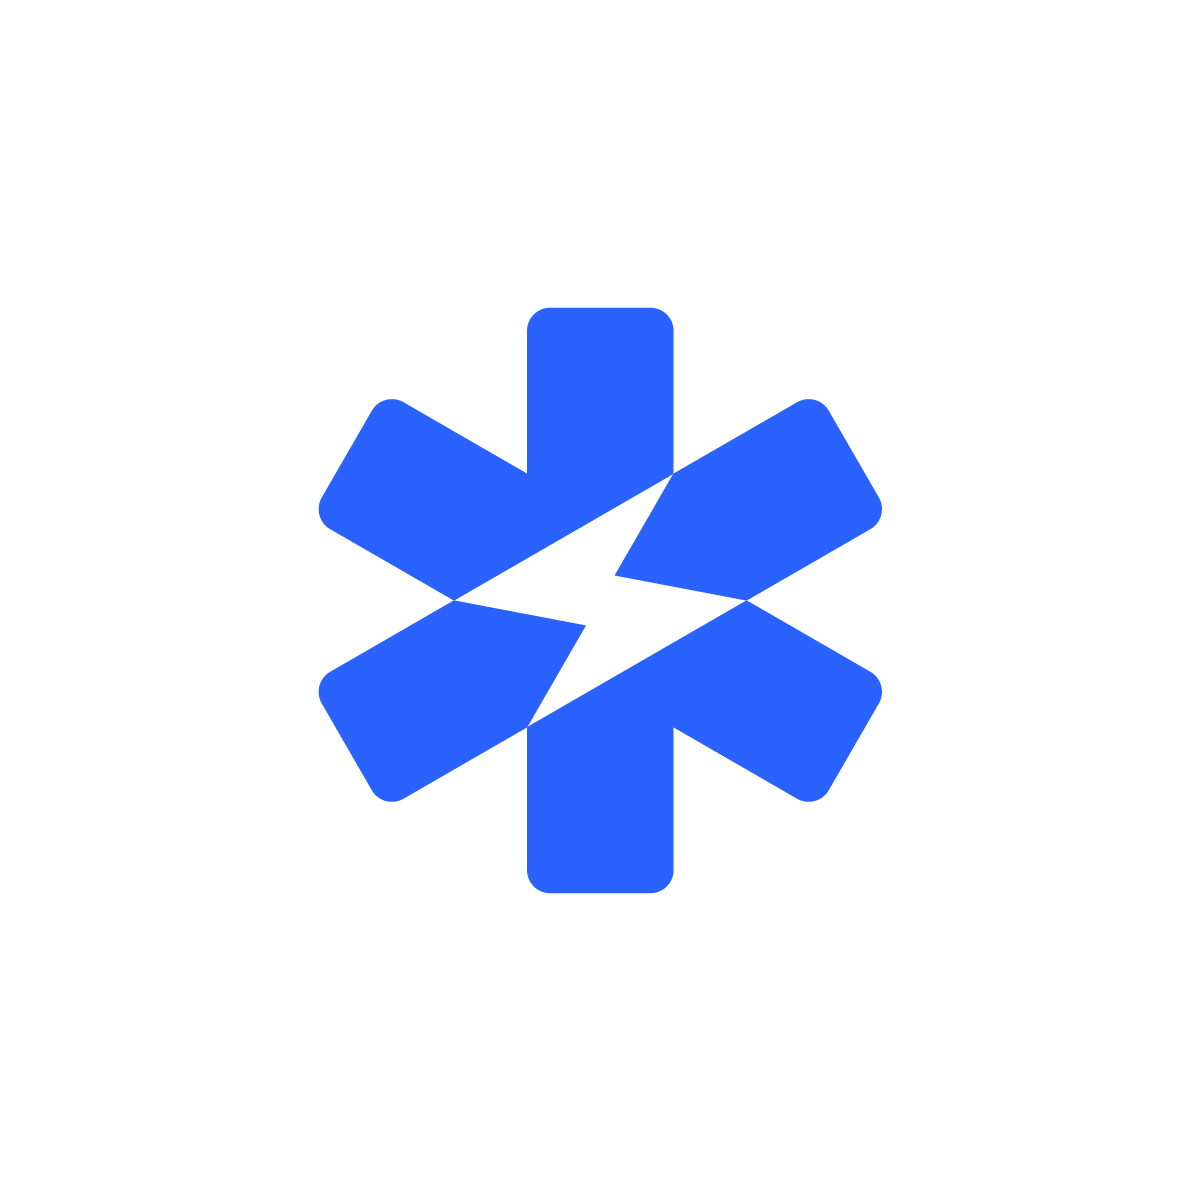 Logo uniting star of life and lightning bolt symbols in negative space using guidelines, ideal for medical-related businesses.